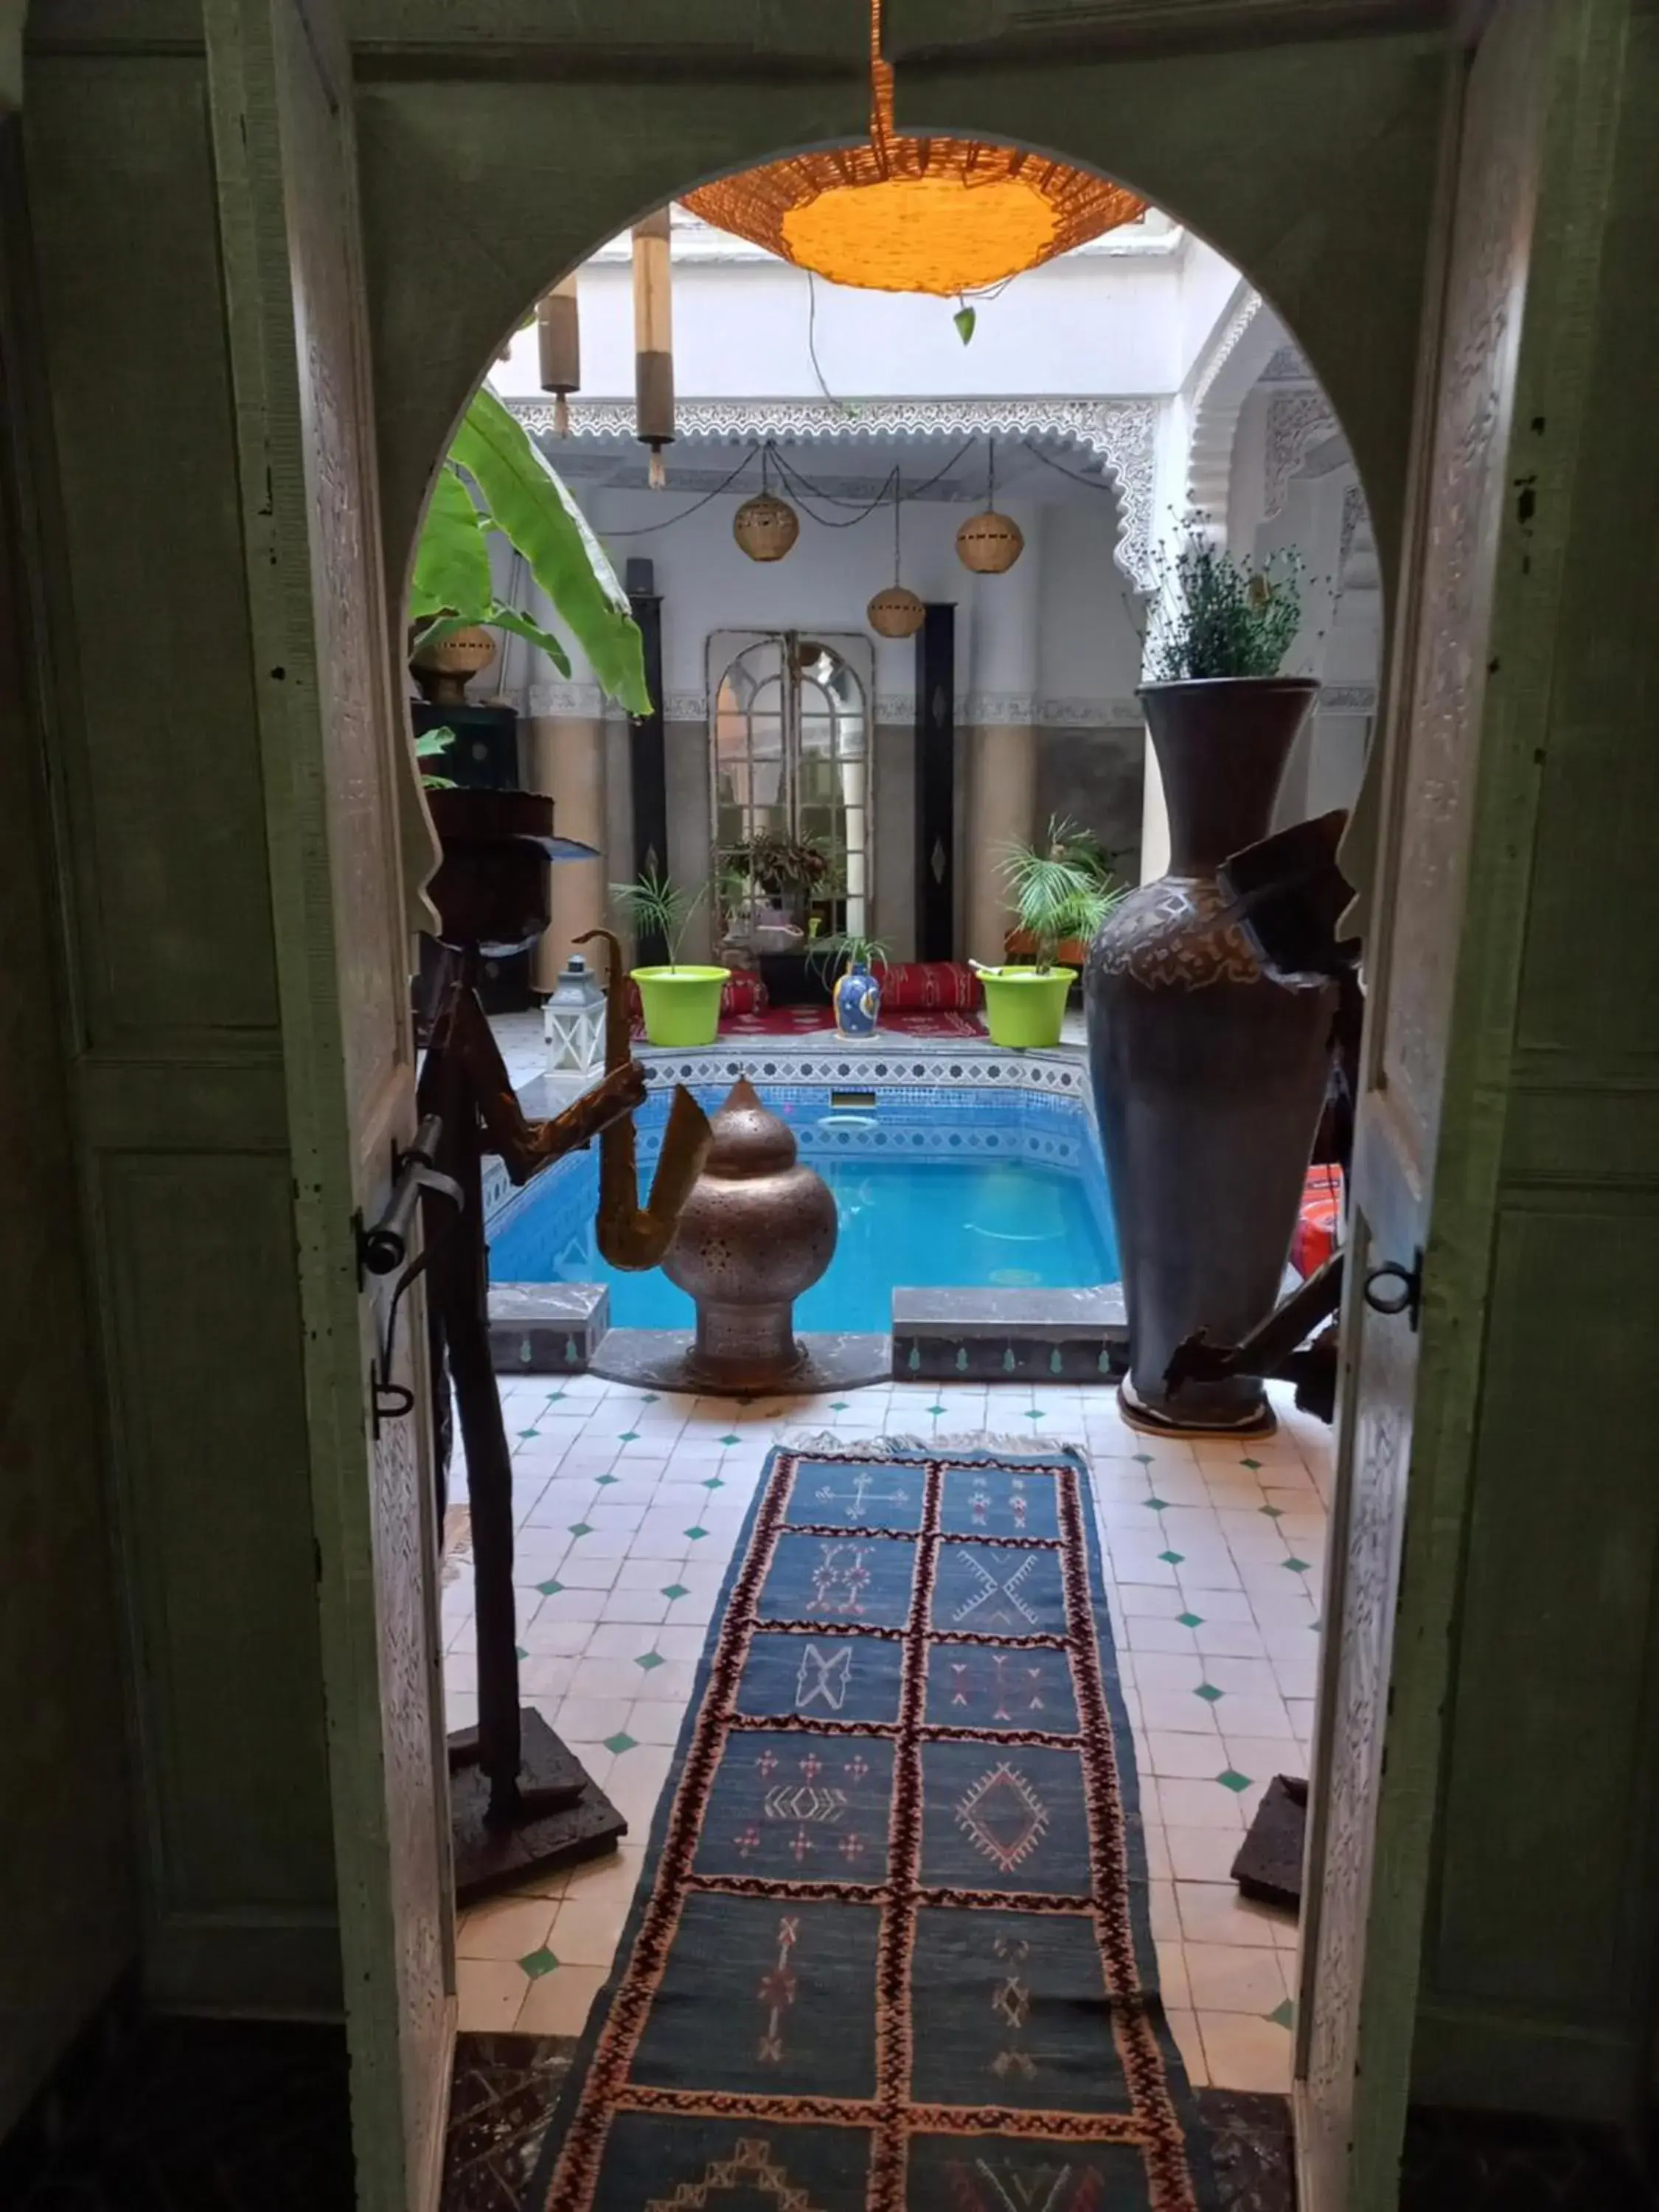 Property building, Swimming Pool in Riad Eloise